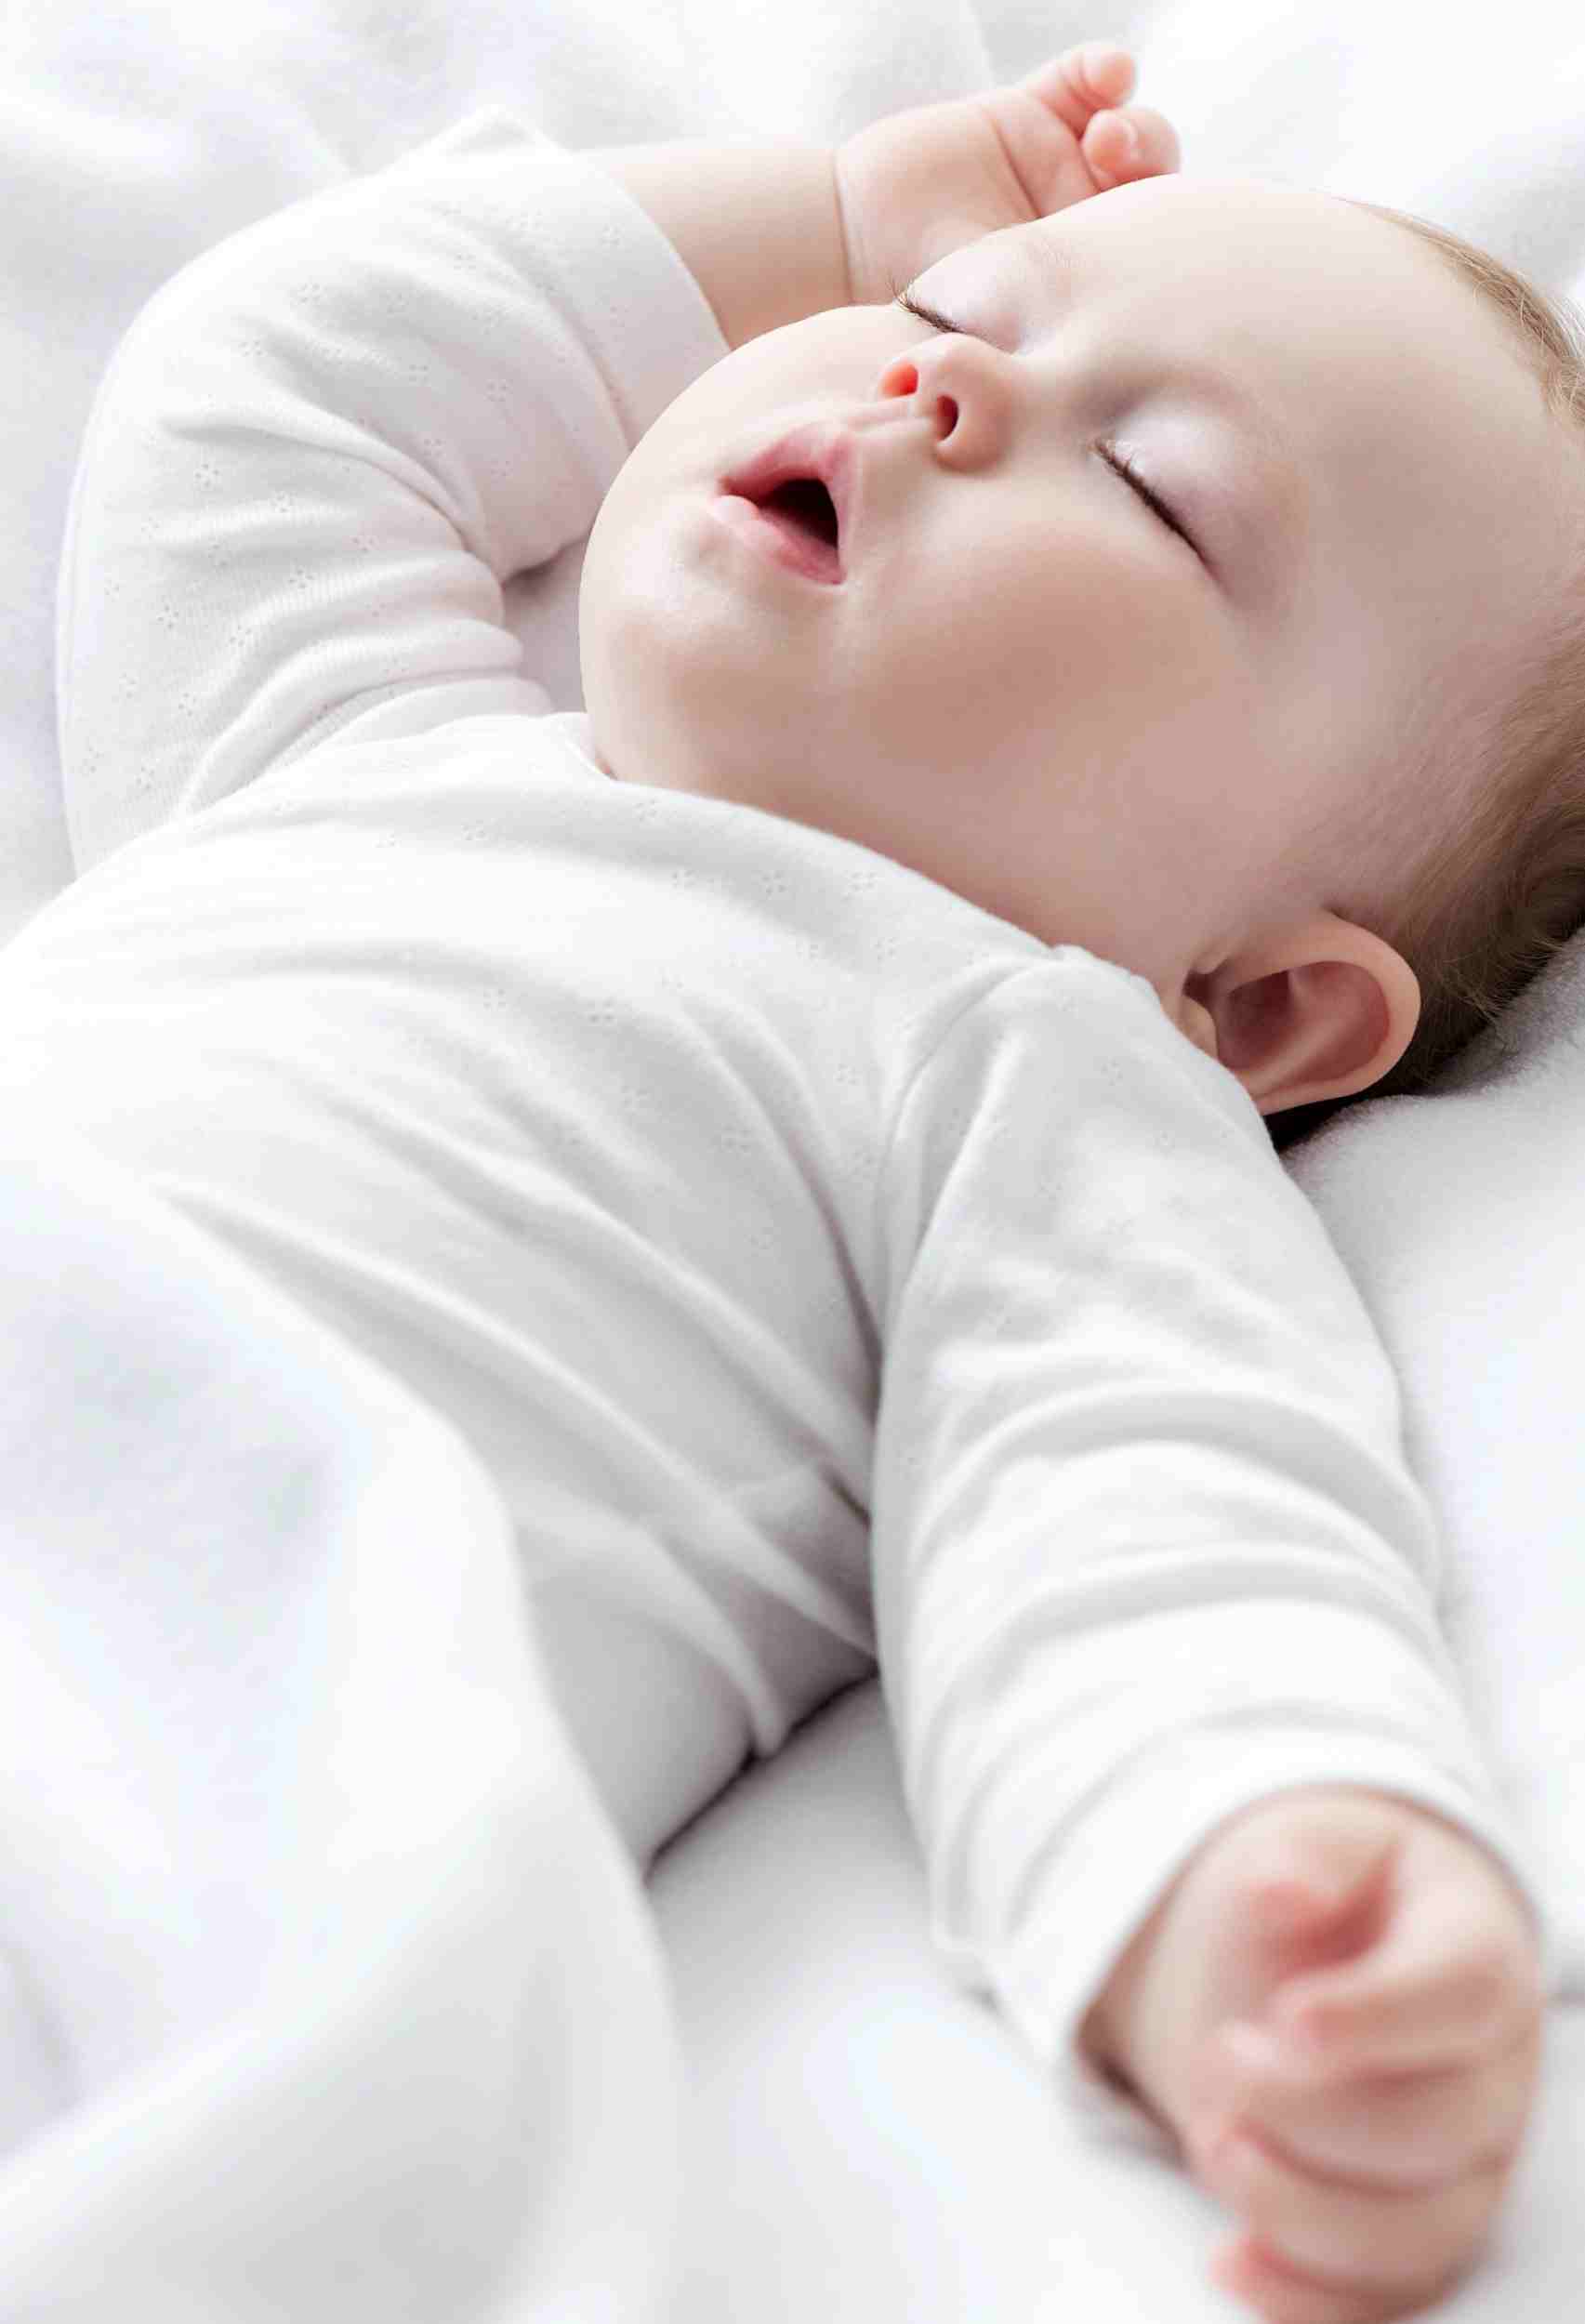 4 Proven Ways to Maximize Your Child's Sleep Quality